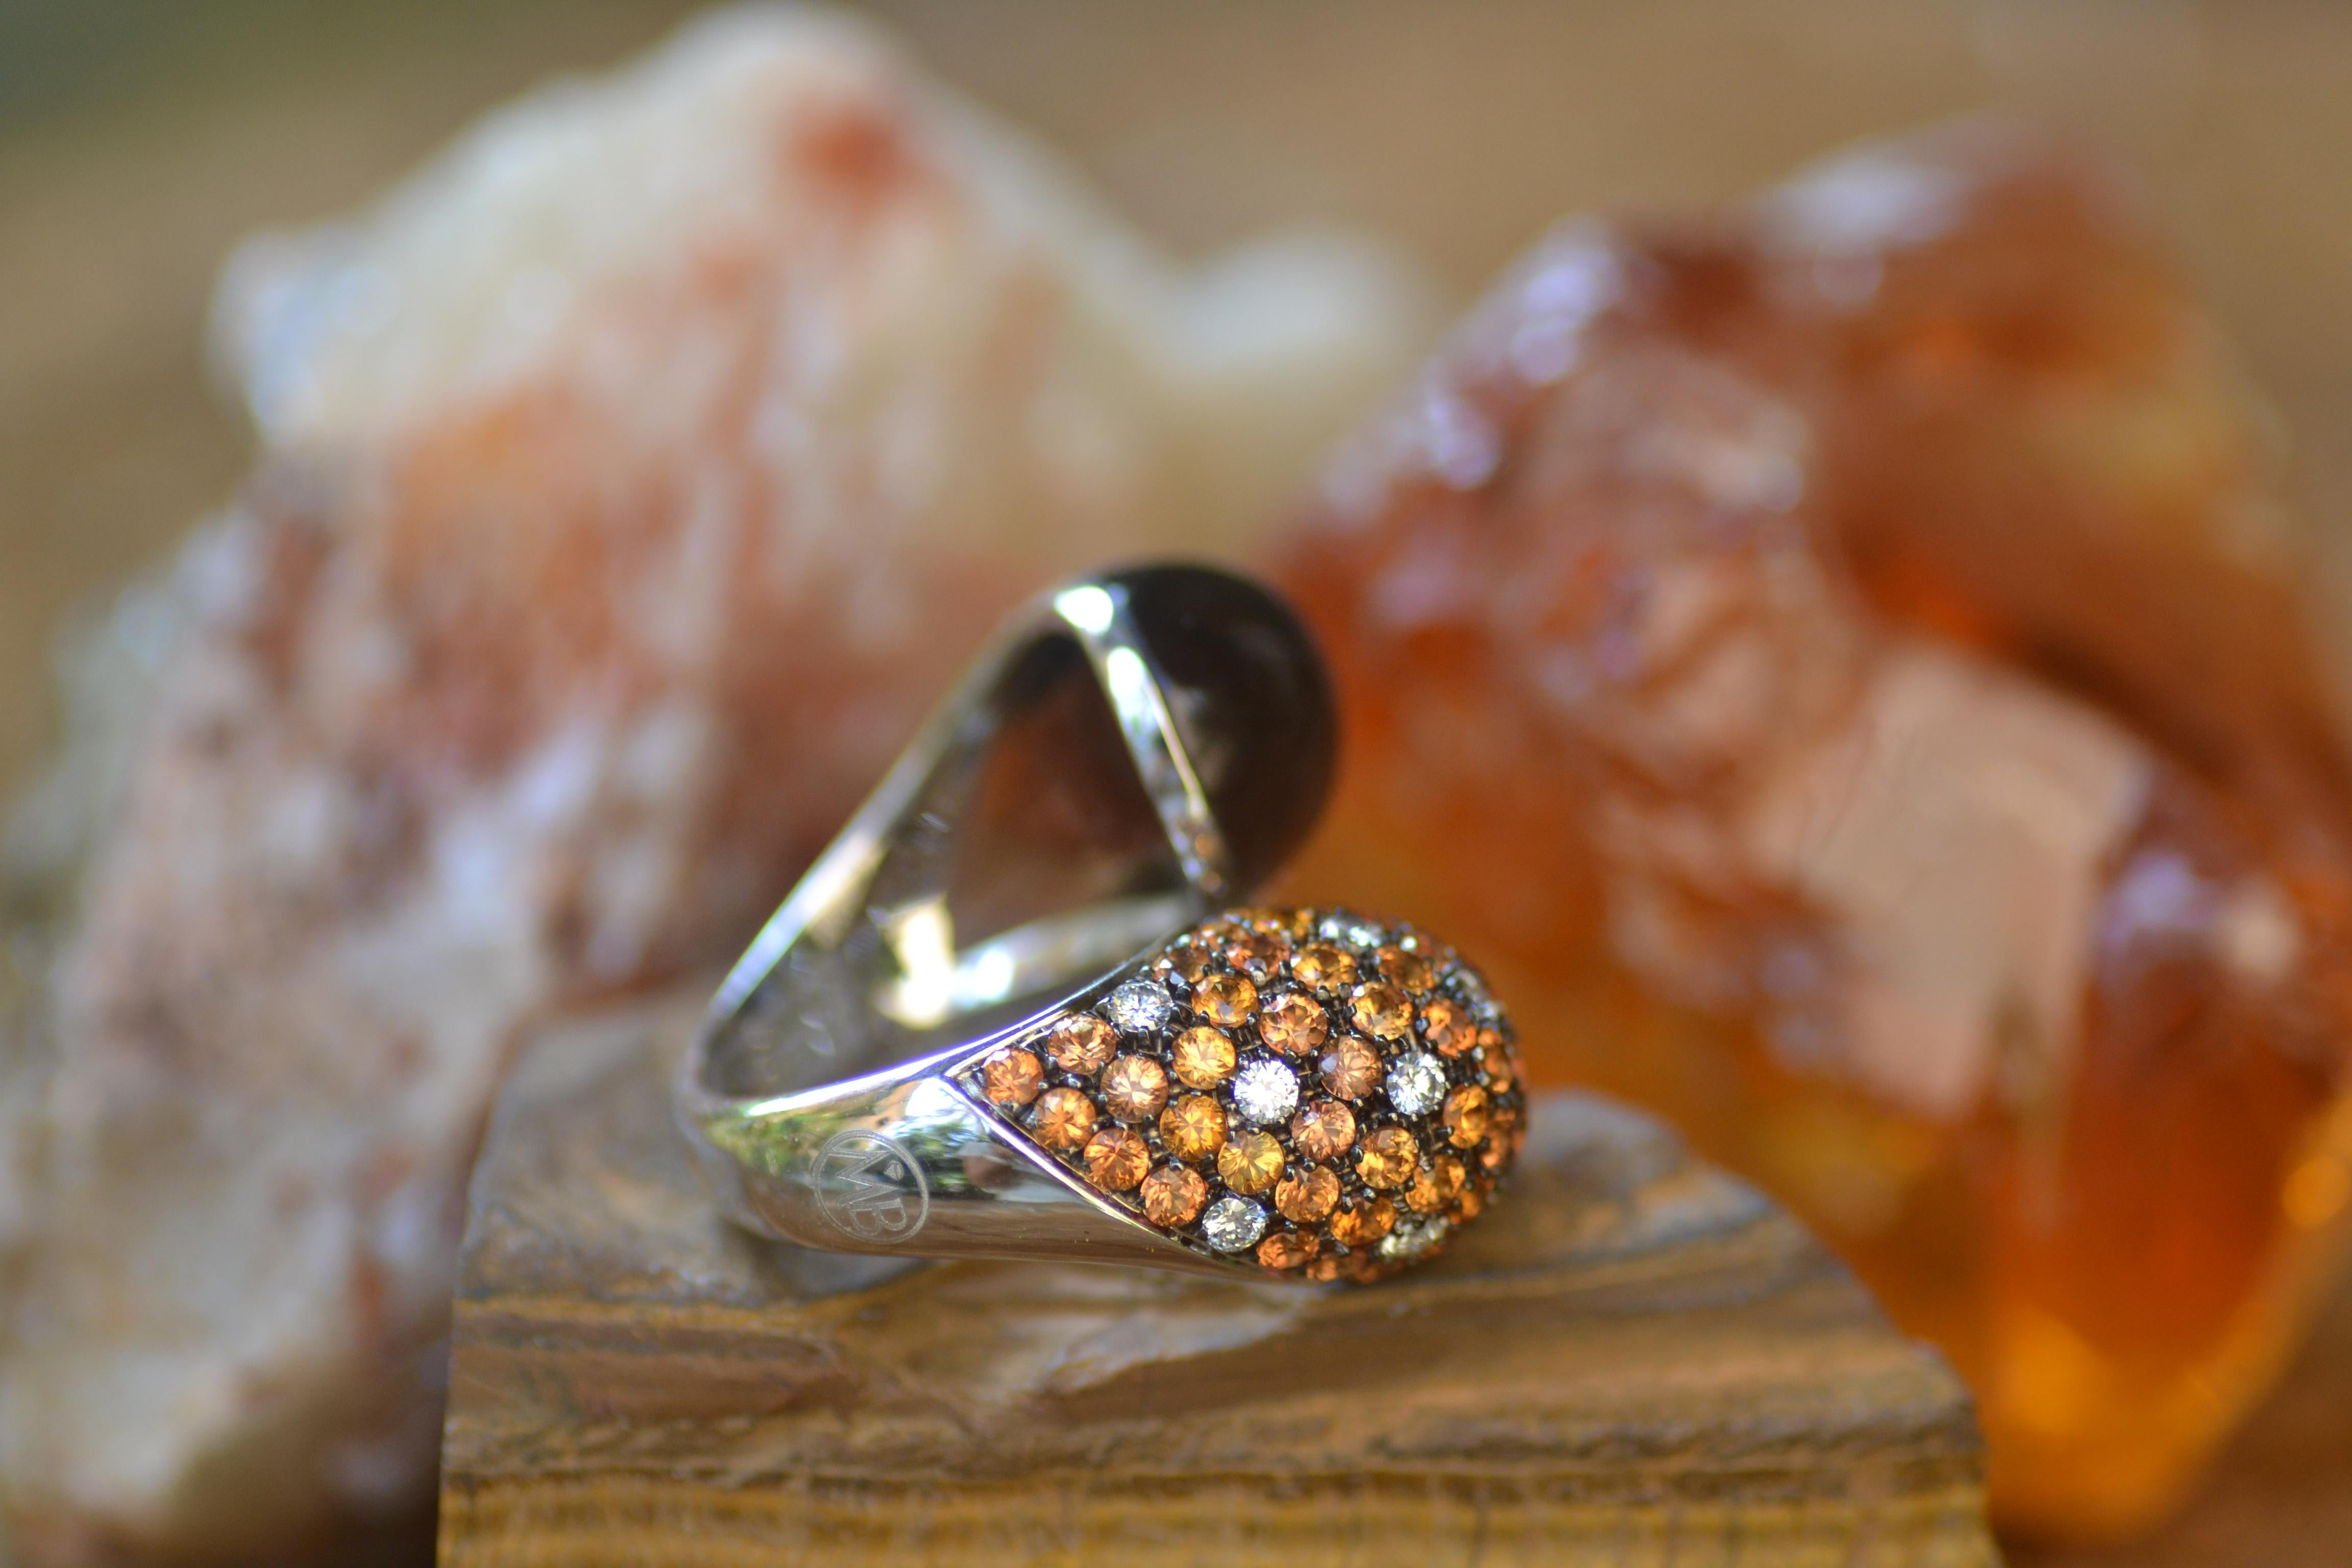 Handcrafted in Margherita Burgener family workshop in Valenza, Italy, this ring is very comfortable and stylish.
One side is full pavé set in orange sapphires with spots of diamonds, while opposite side is a cabochon cut smoky quartz

18 KT white 